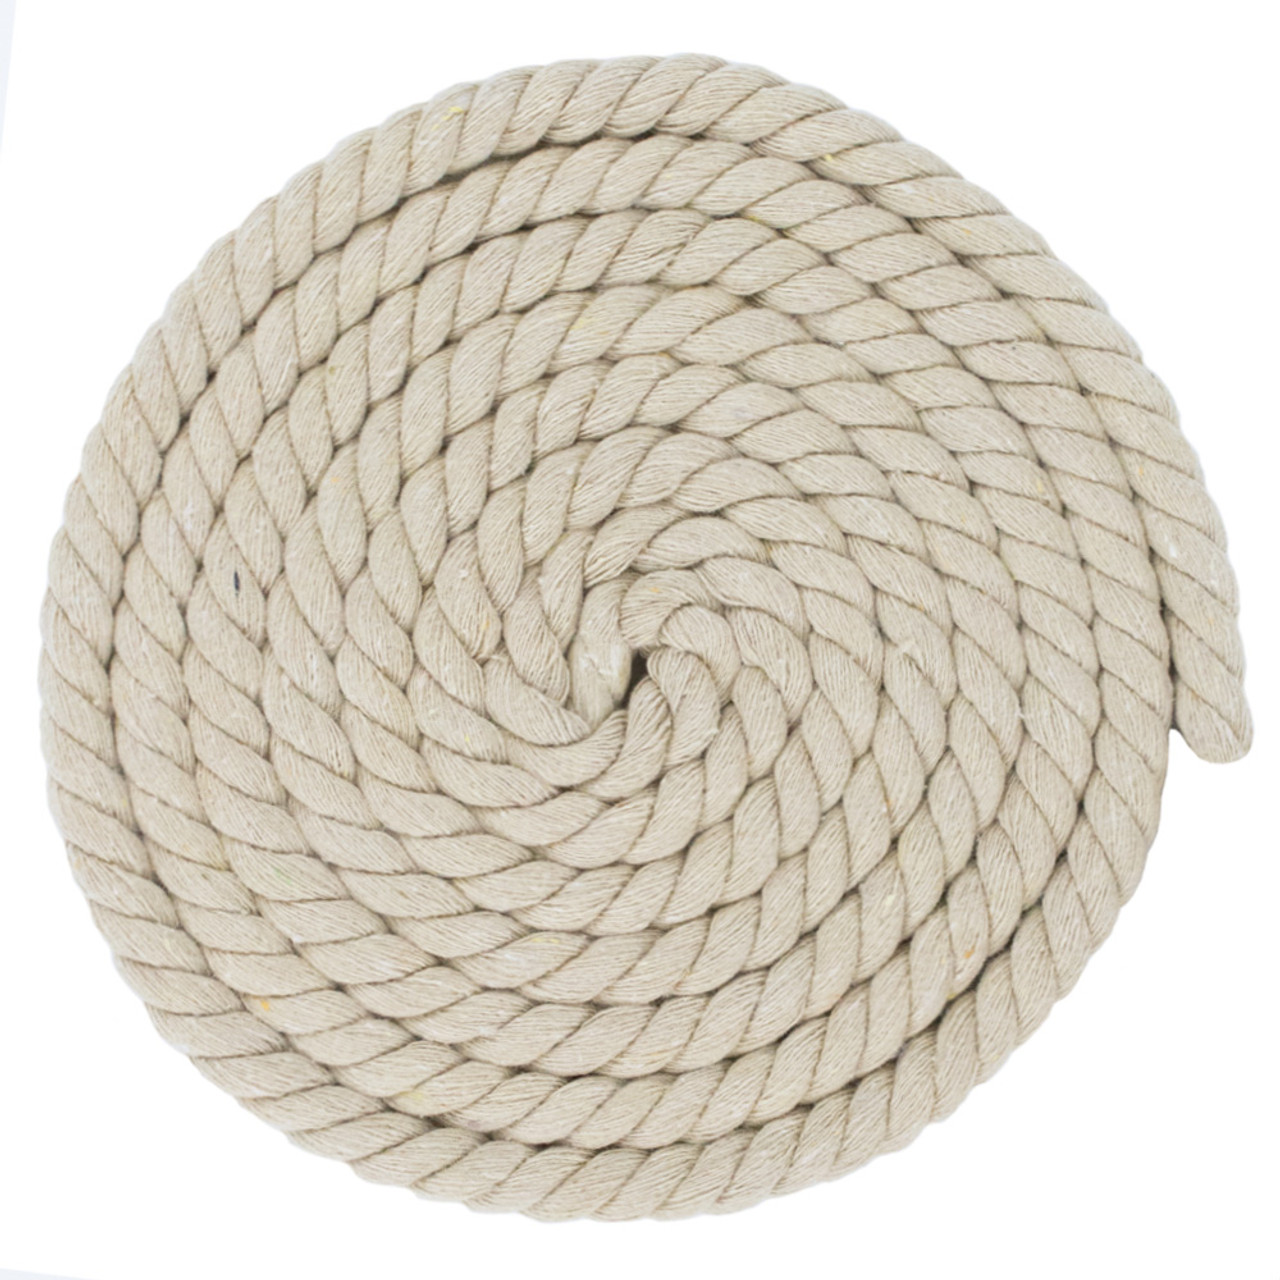 Twisted Cotton Rope - 1/4 Inch Rope in 10, 25, 50, and 100 Feet - Solid  Colors